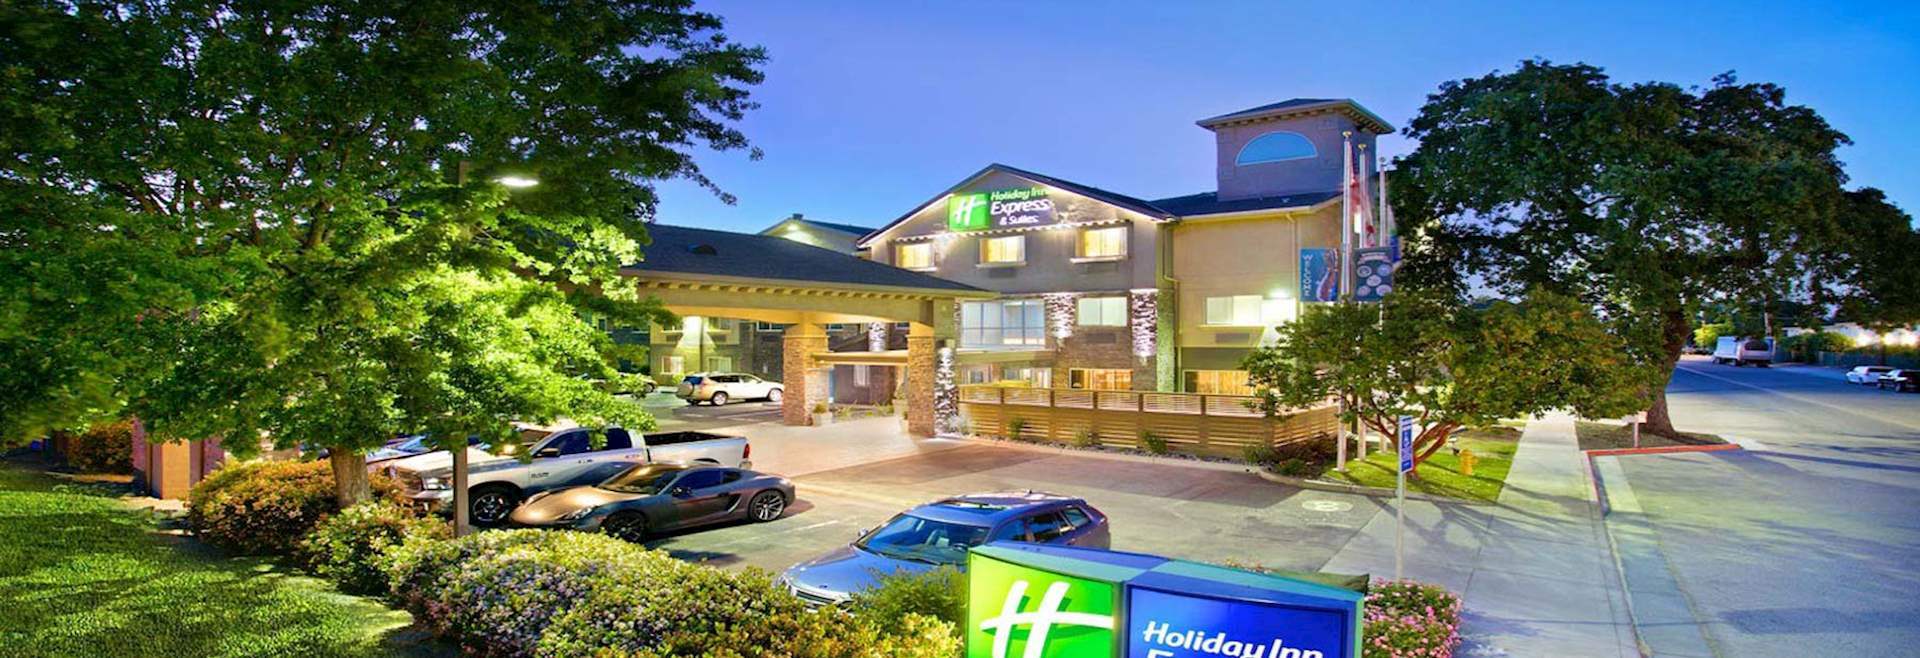 Hotel Exterior - Holiday Inn Express & Suites Paso Robles